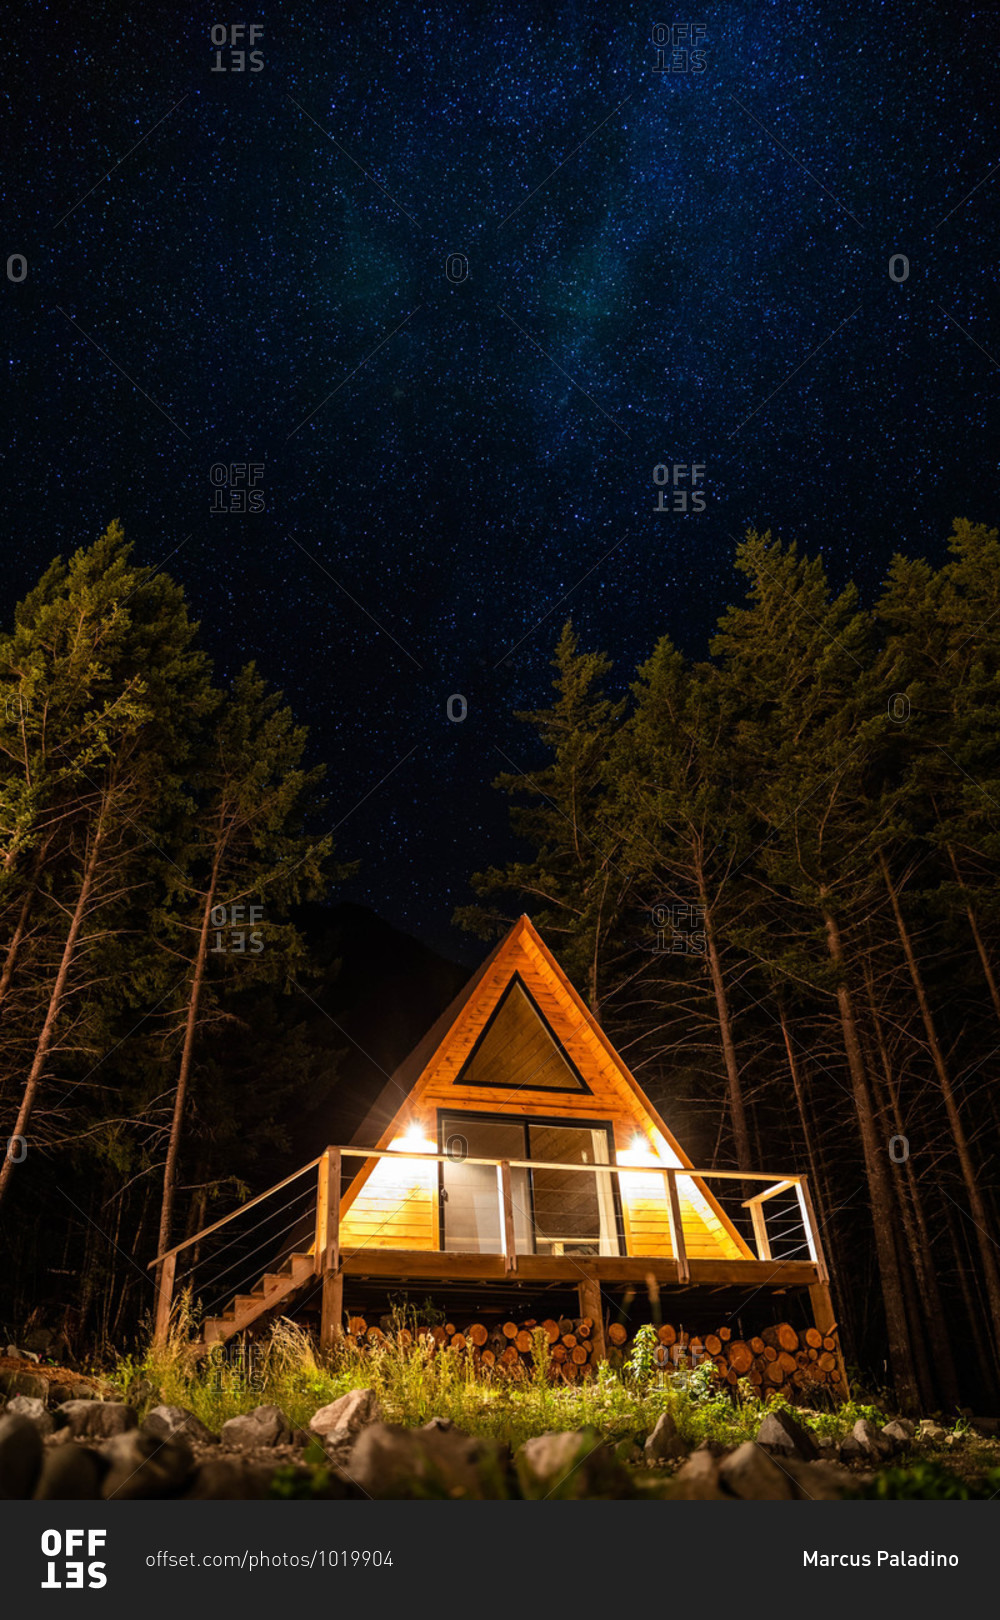 An a-frame cabin in the mountains at night